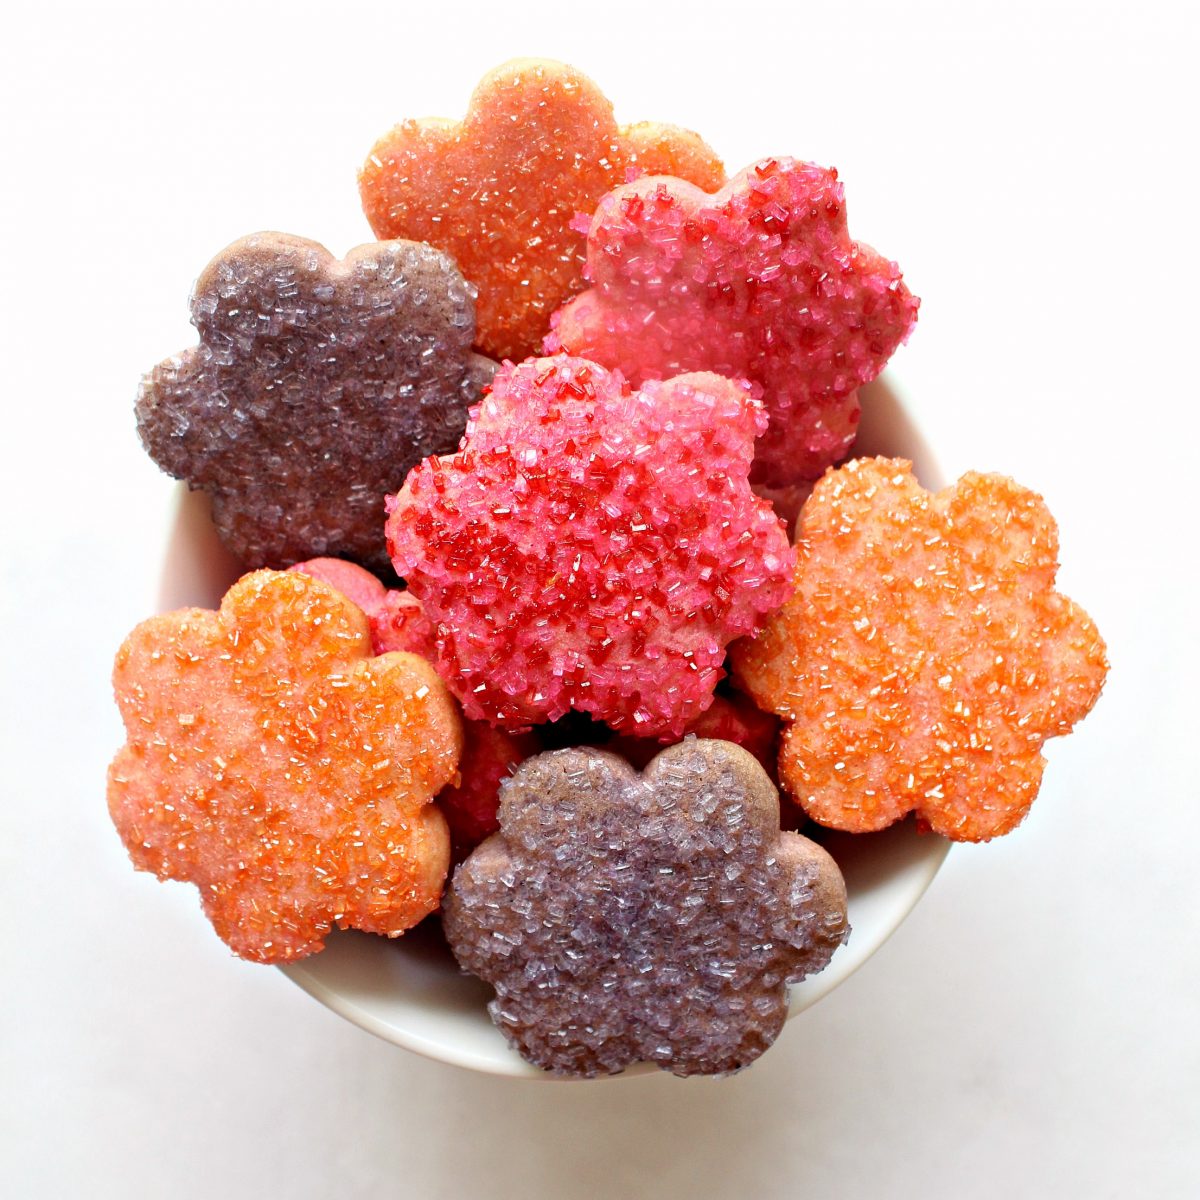 A bowl filled with orange, pink, and purple cookies cut out in daisy shapes.